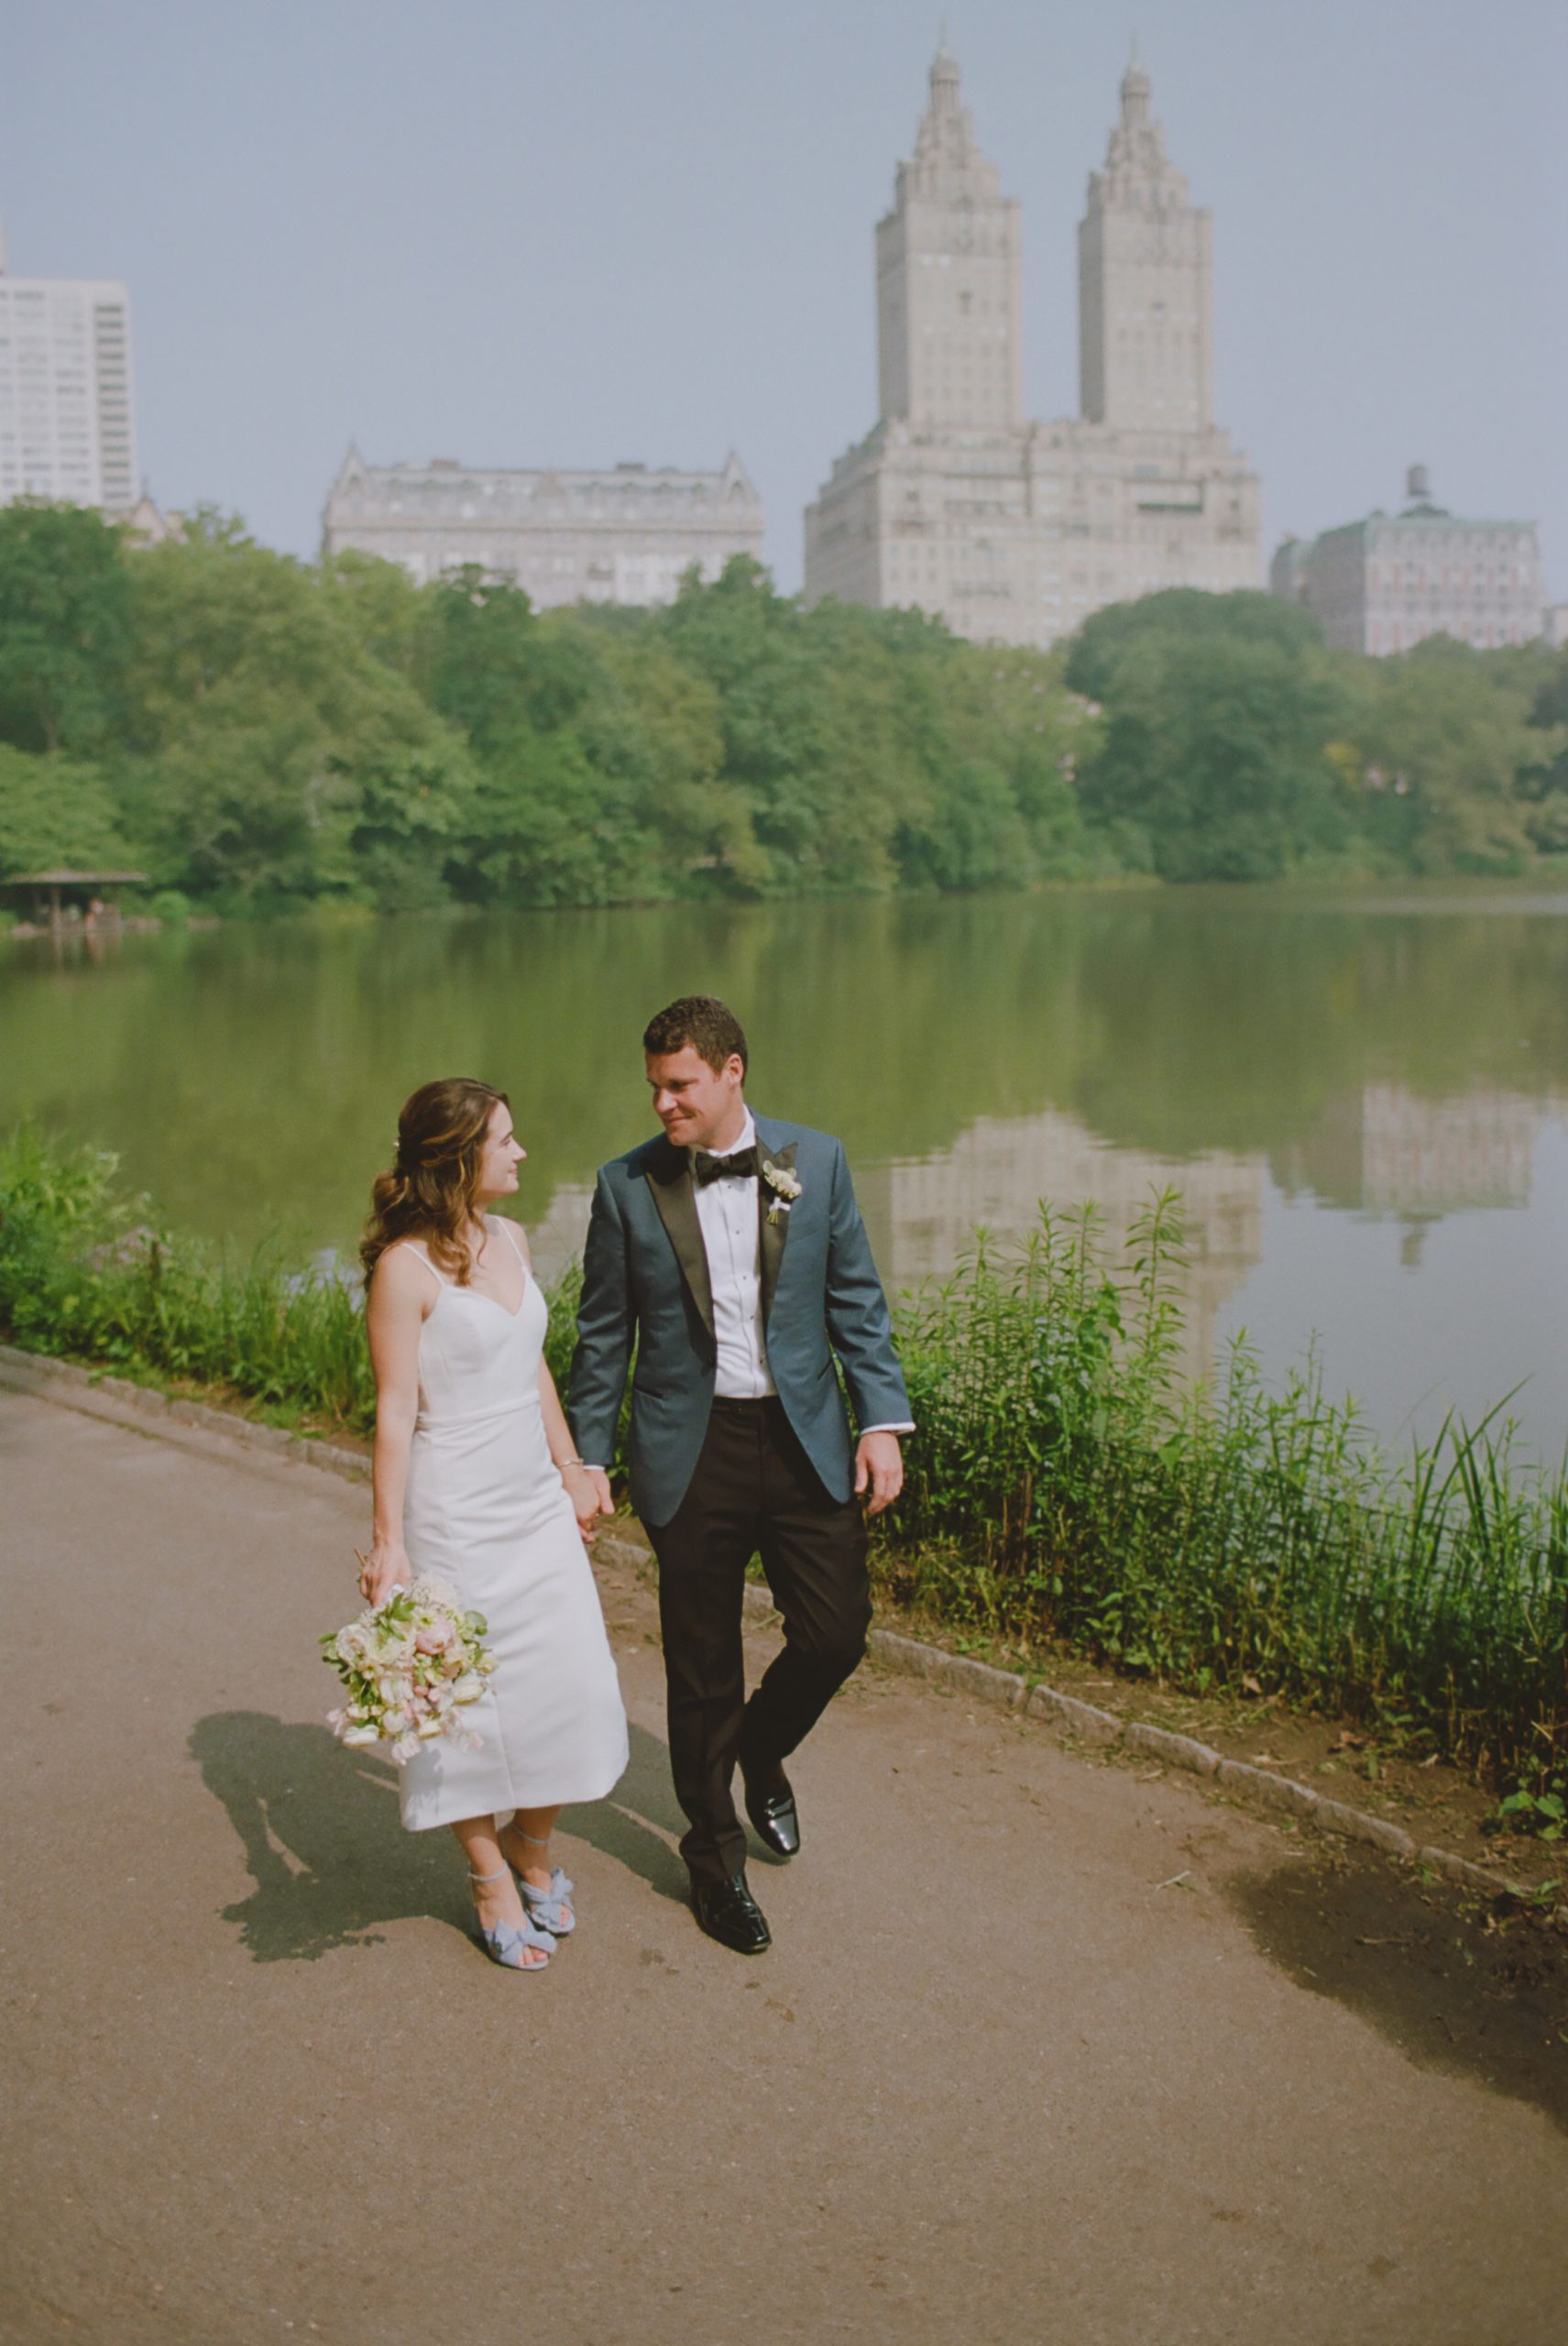 James Bristow and Jacqueline Reilly, of Chicago, were married in a private ceremony at Shakespeare Garden, Central Park, New York City. Afterward, the couple hosted family and close friends for lunch at a French brasserie. Katie Osgood Photography 
